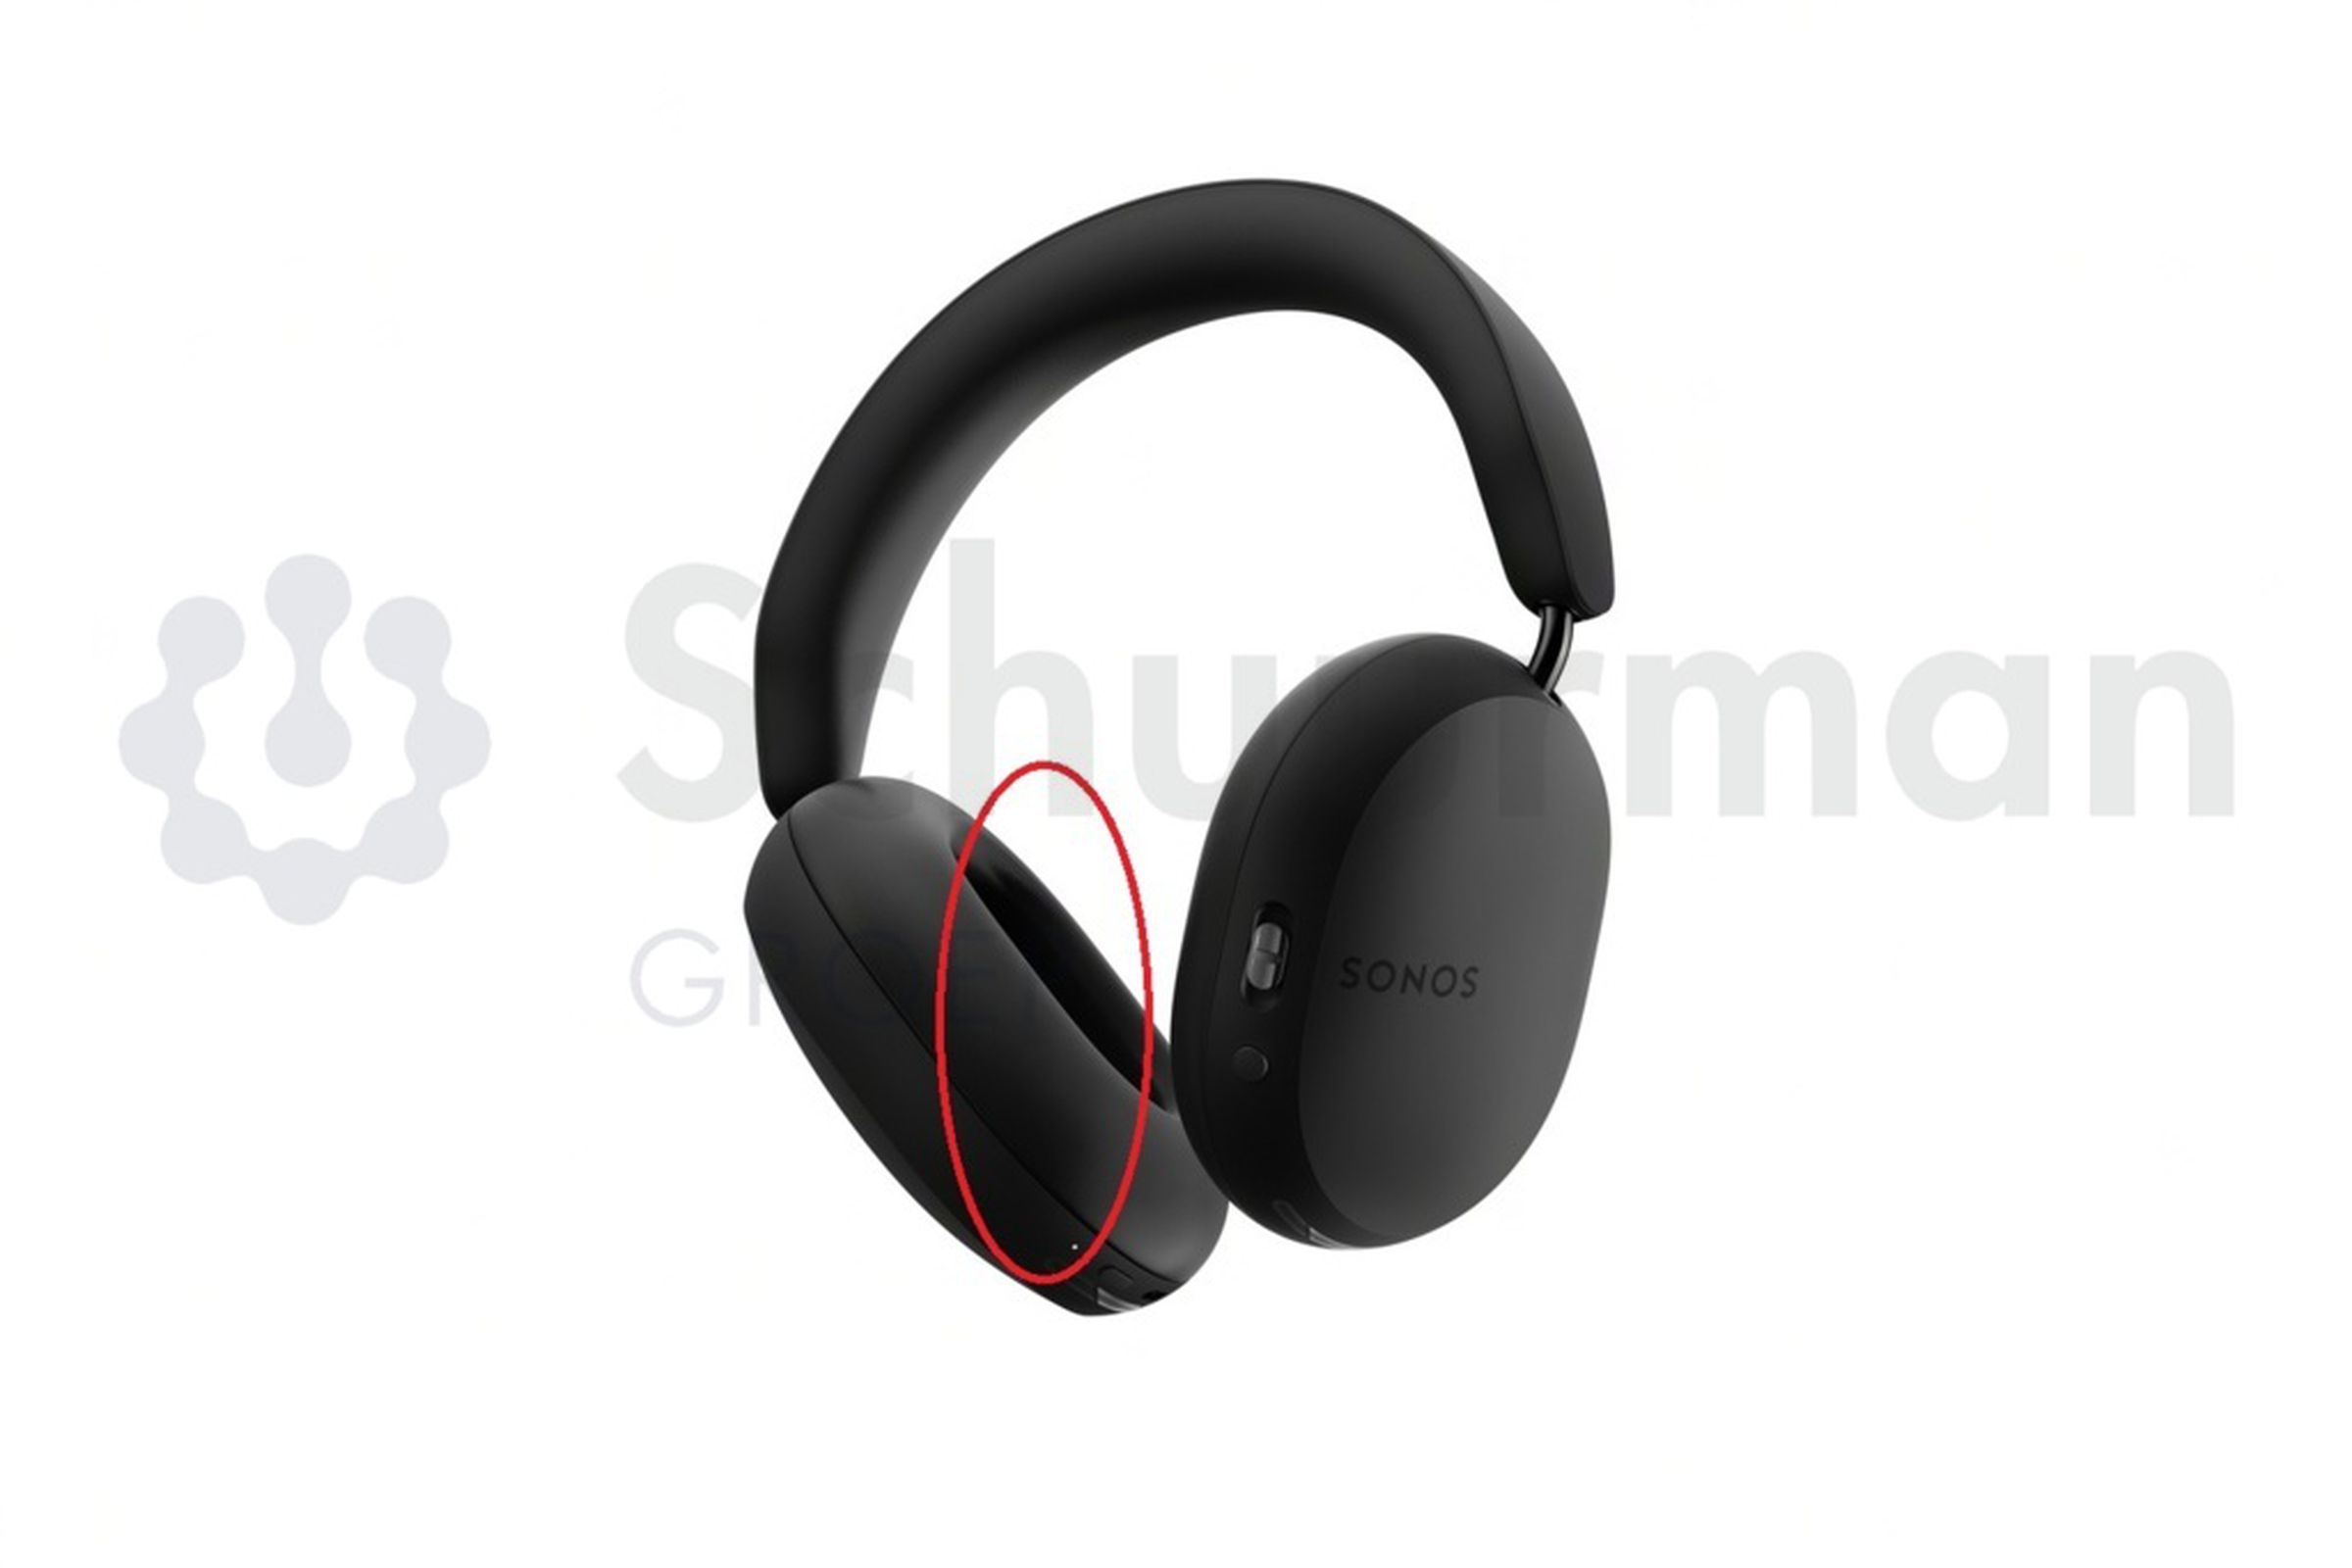 A leaked image of the Sonos Ace headphones in black.